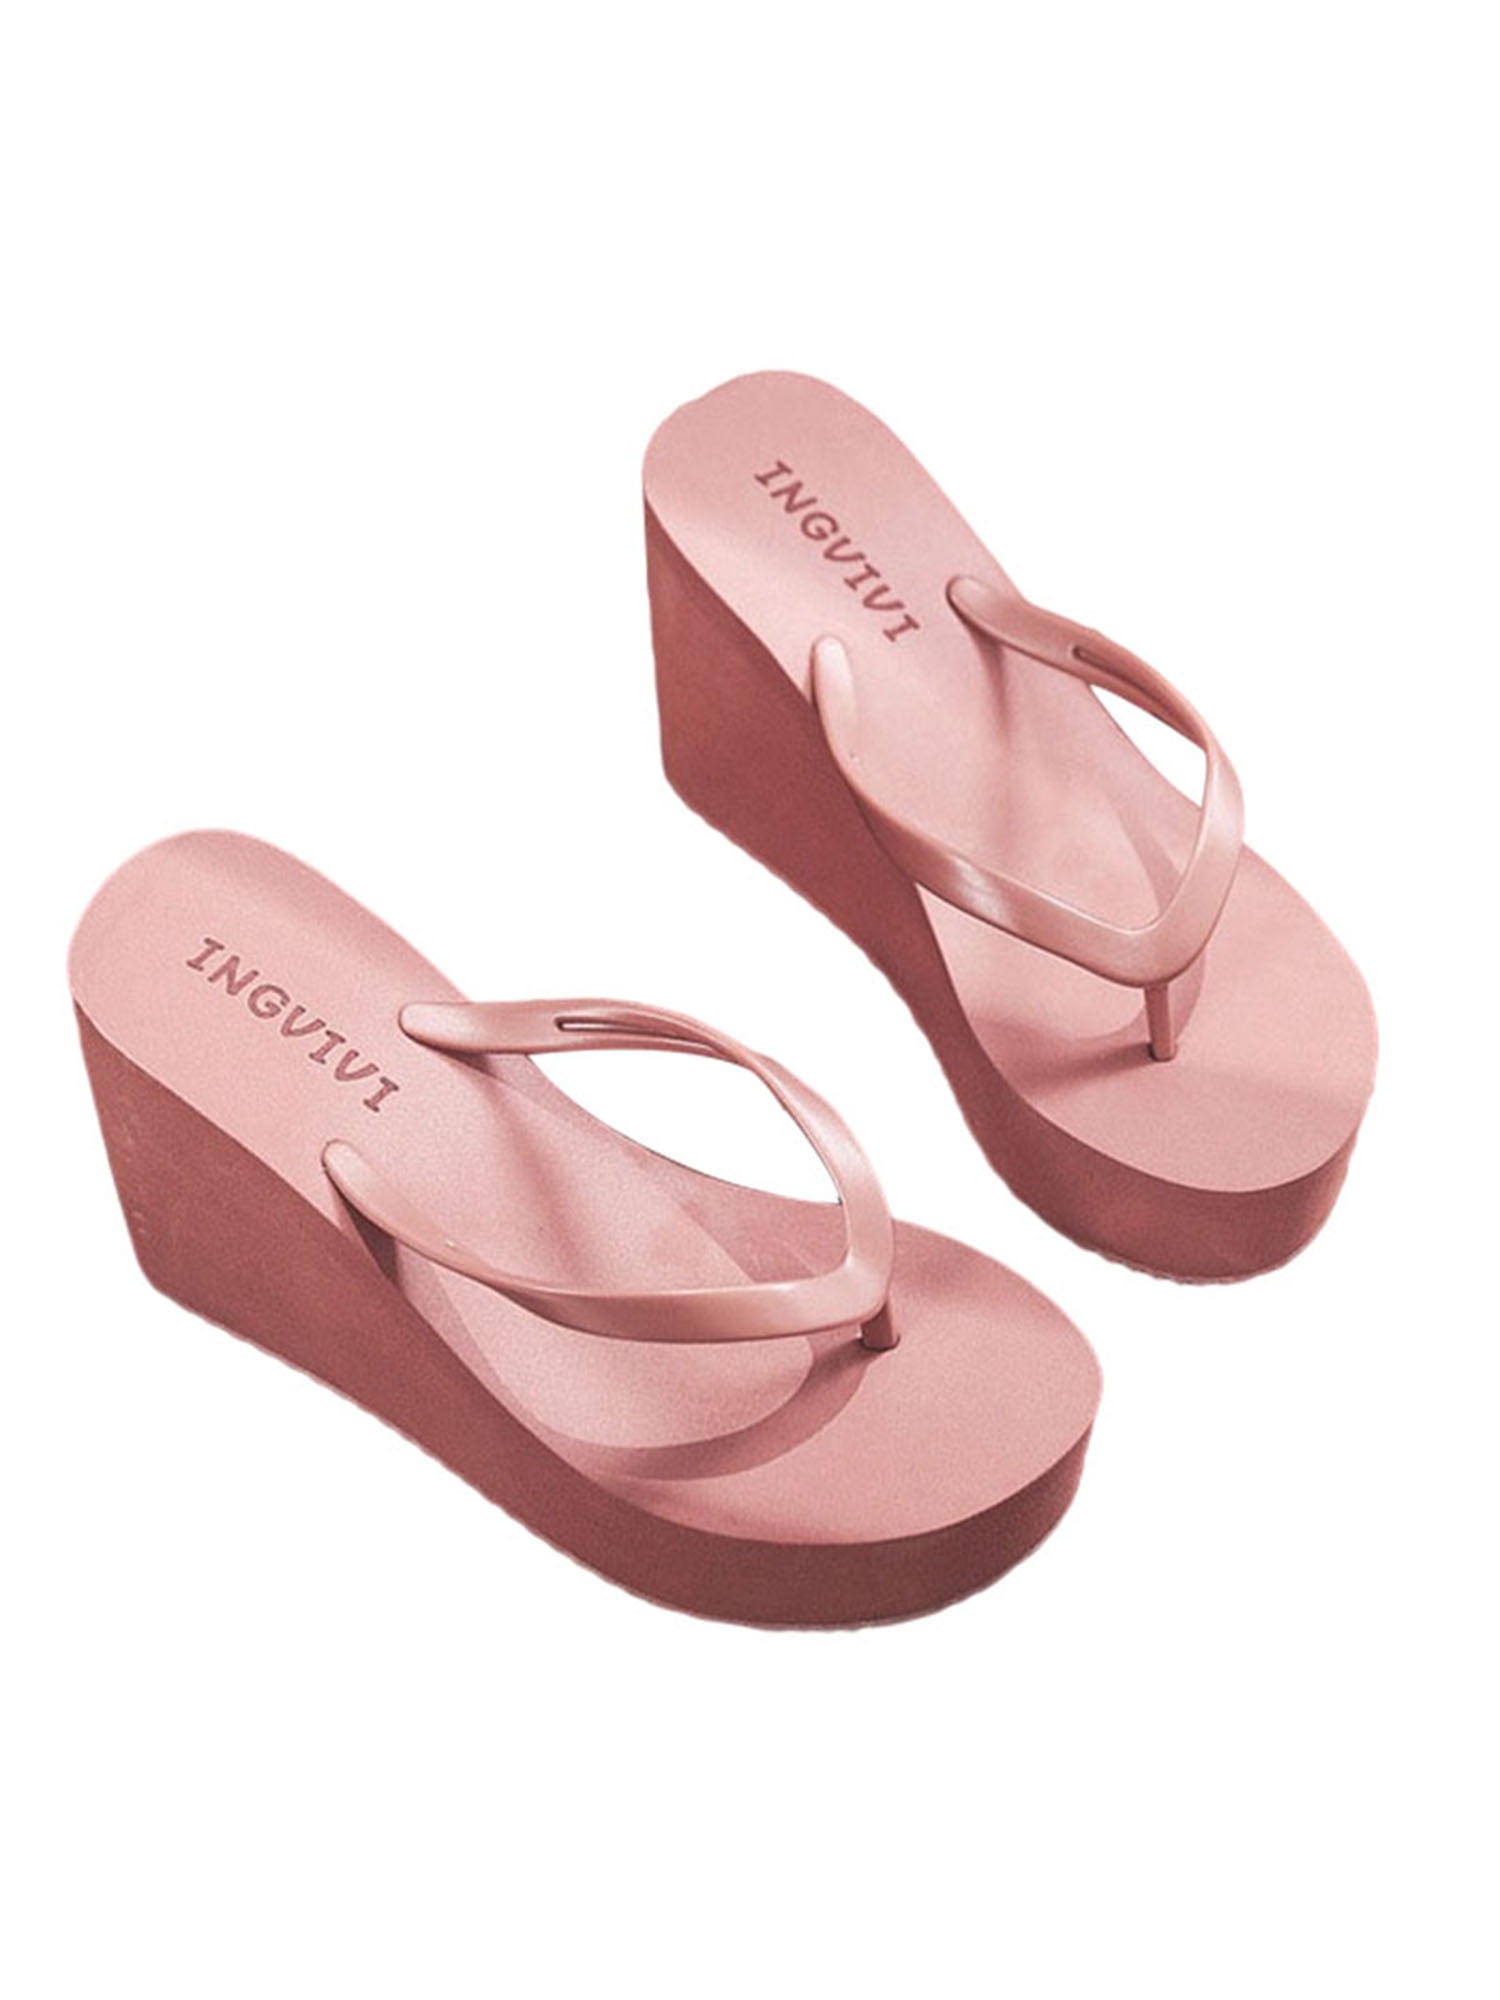 Wedges Sandals for Women Casual Wedges Slide Sandals for Women T Strap Flip Flops Sandals Summer Female Thick Bottom Casual Roman Bow Slippers